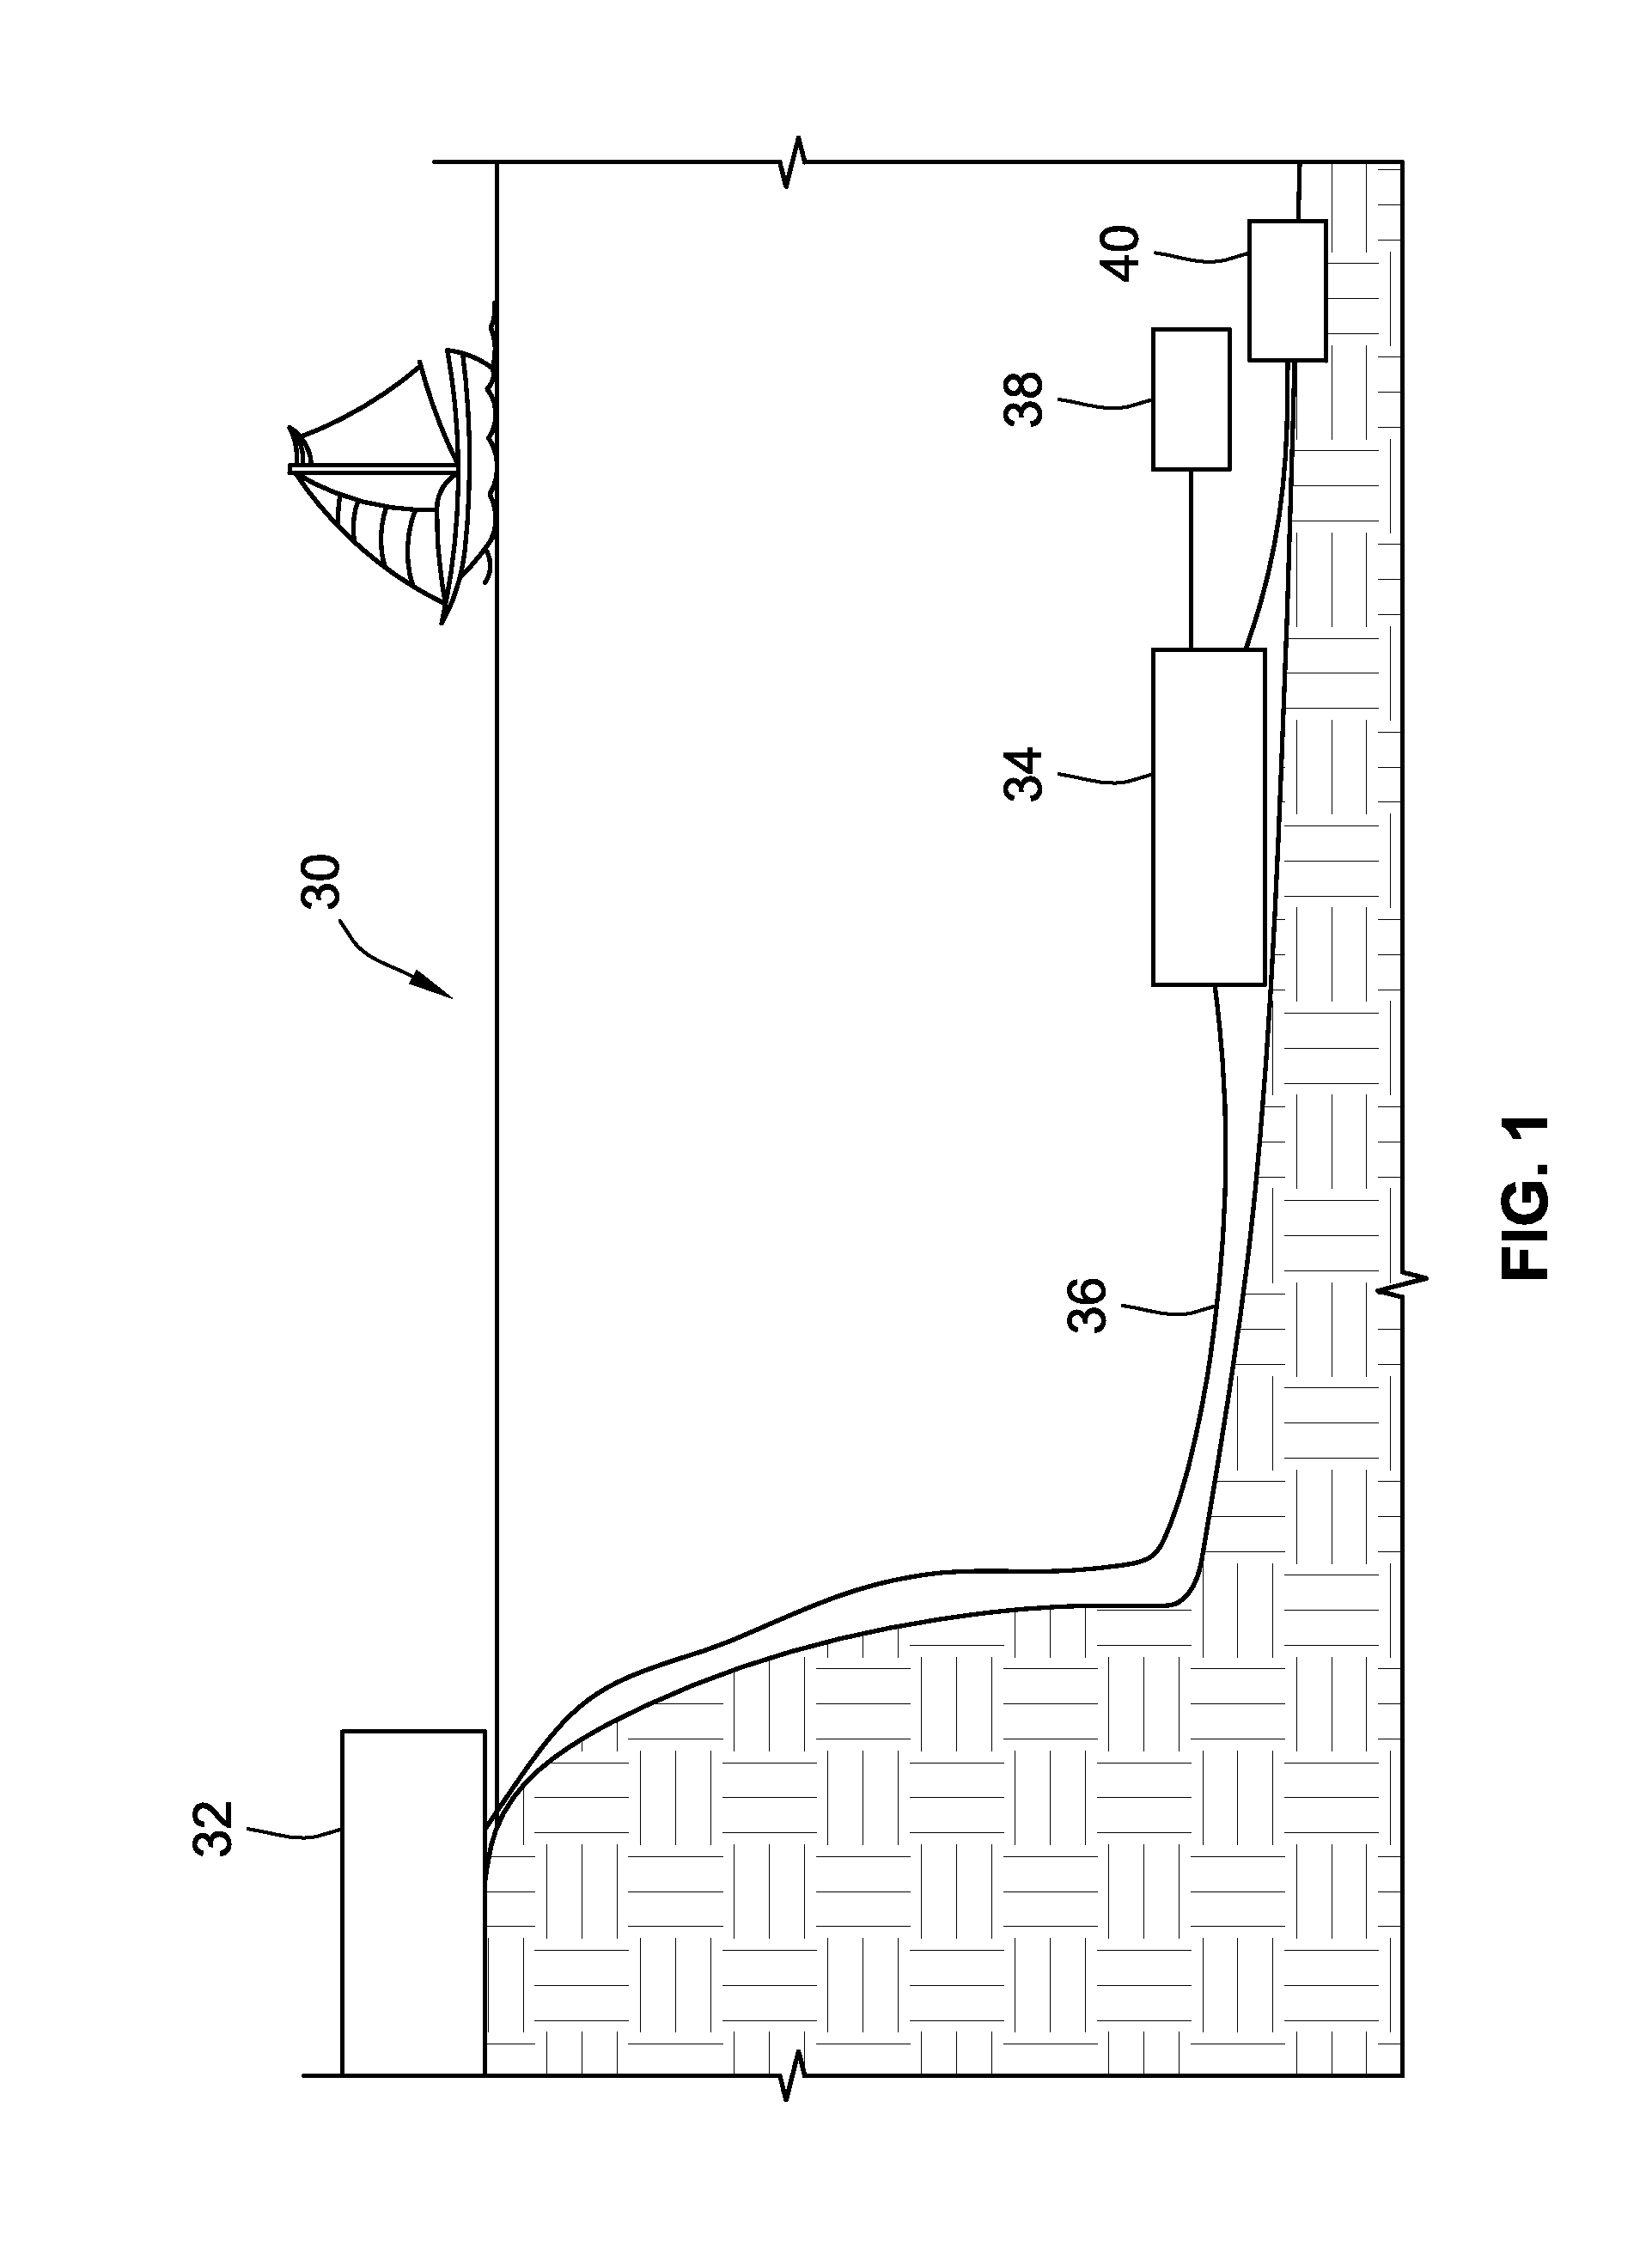 Subsea Electrical Distribution System Having Redundant Circuit Breaker Control and Method for Providing Same